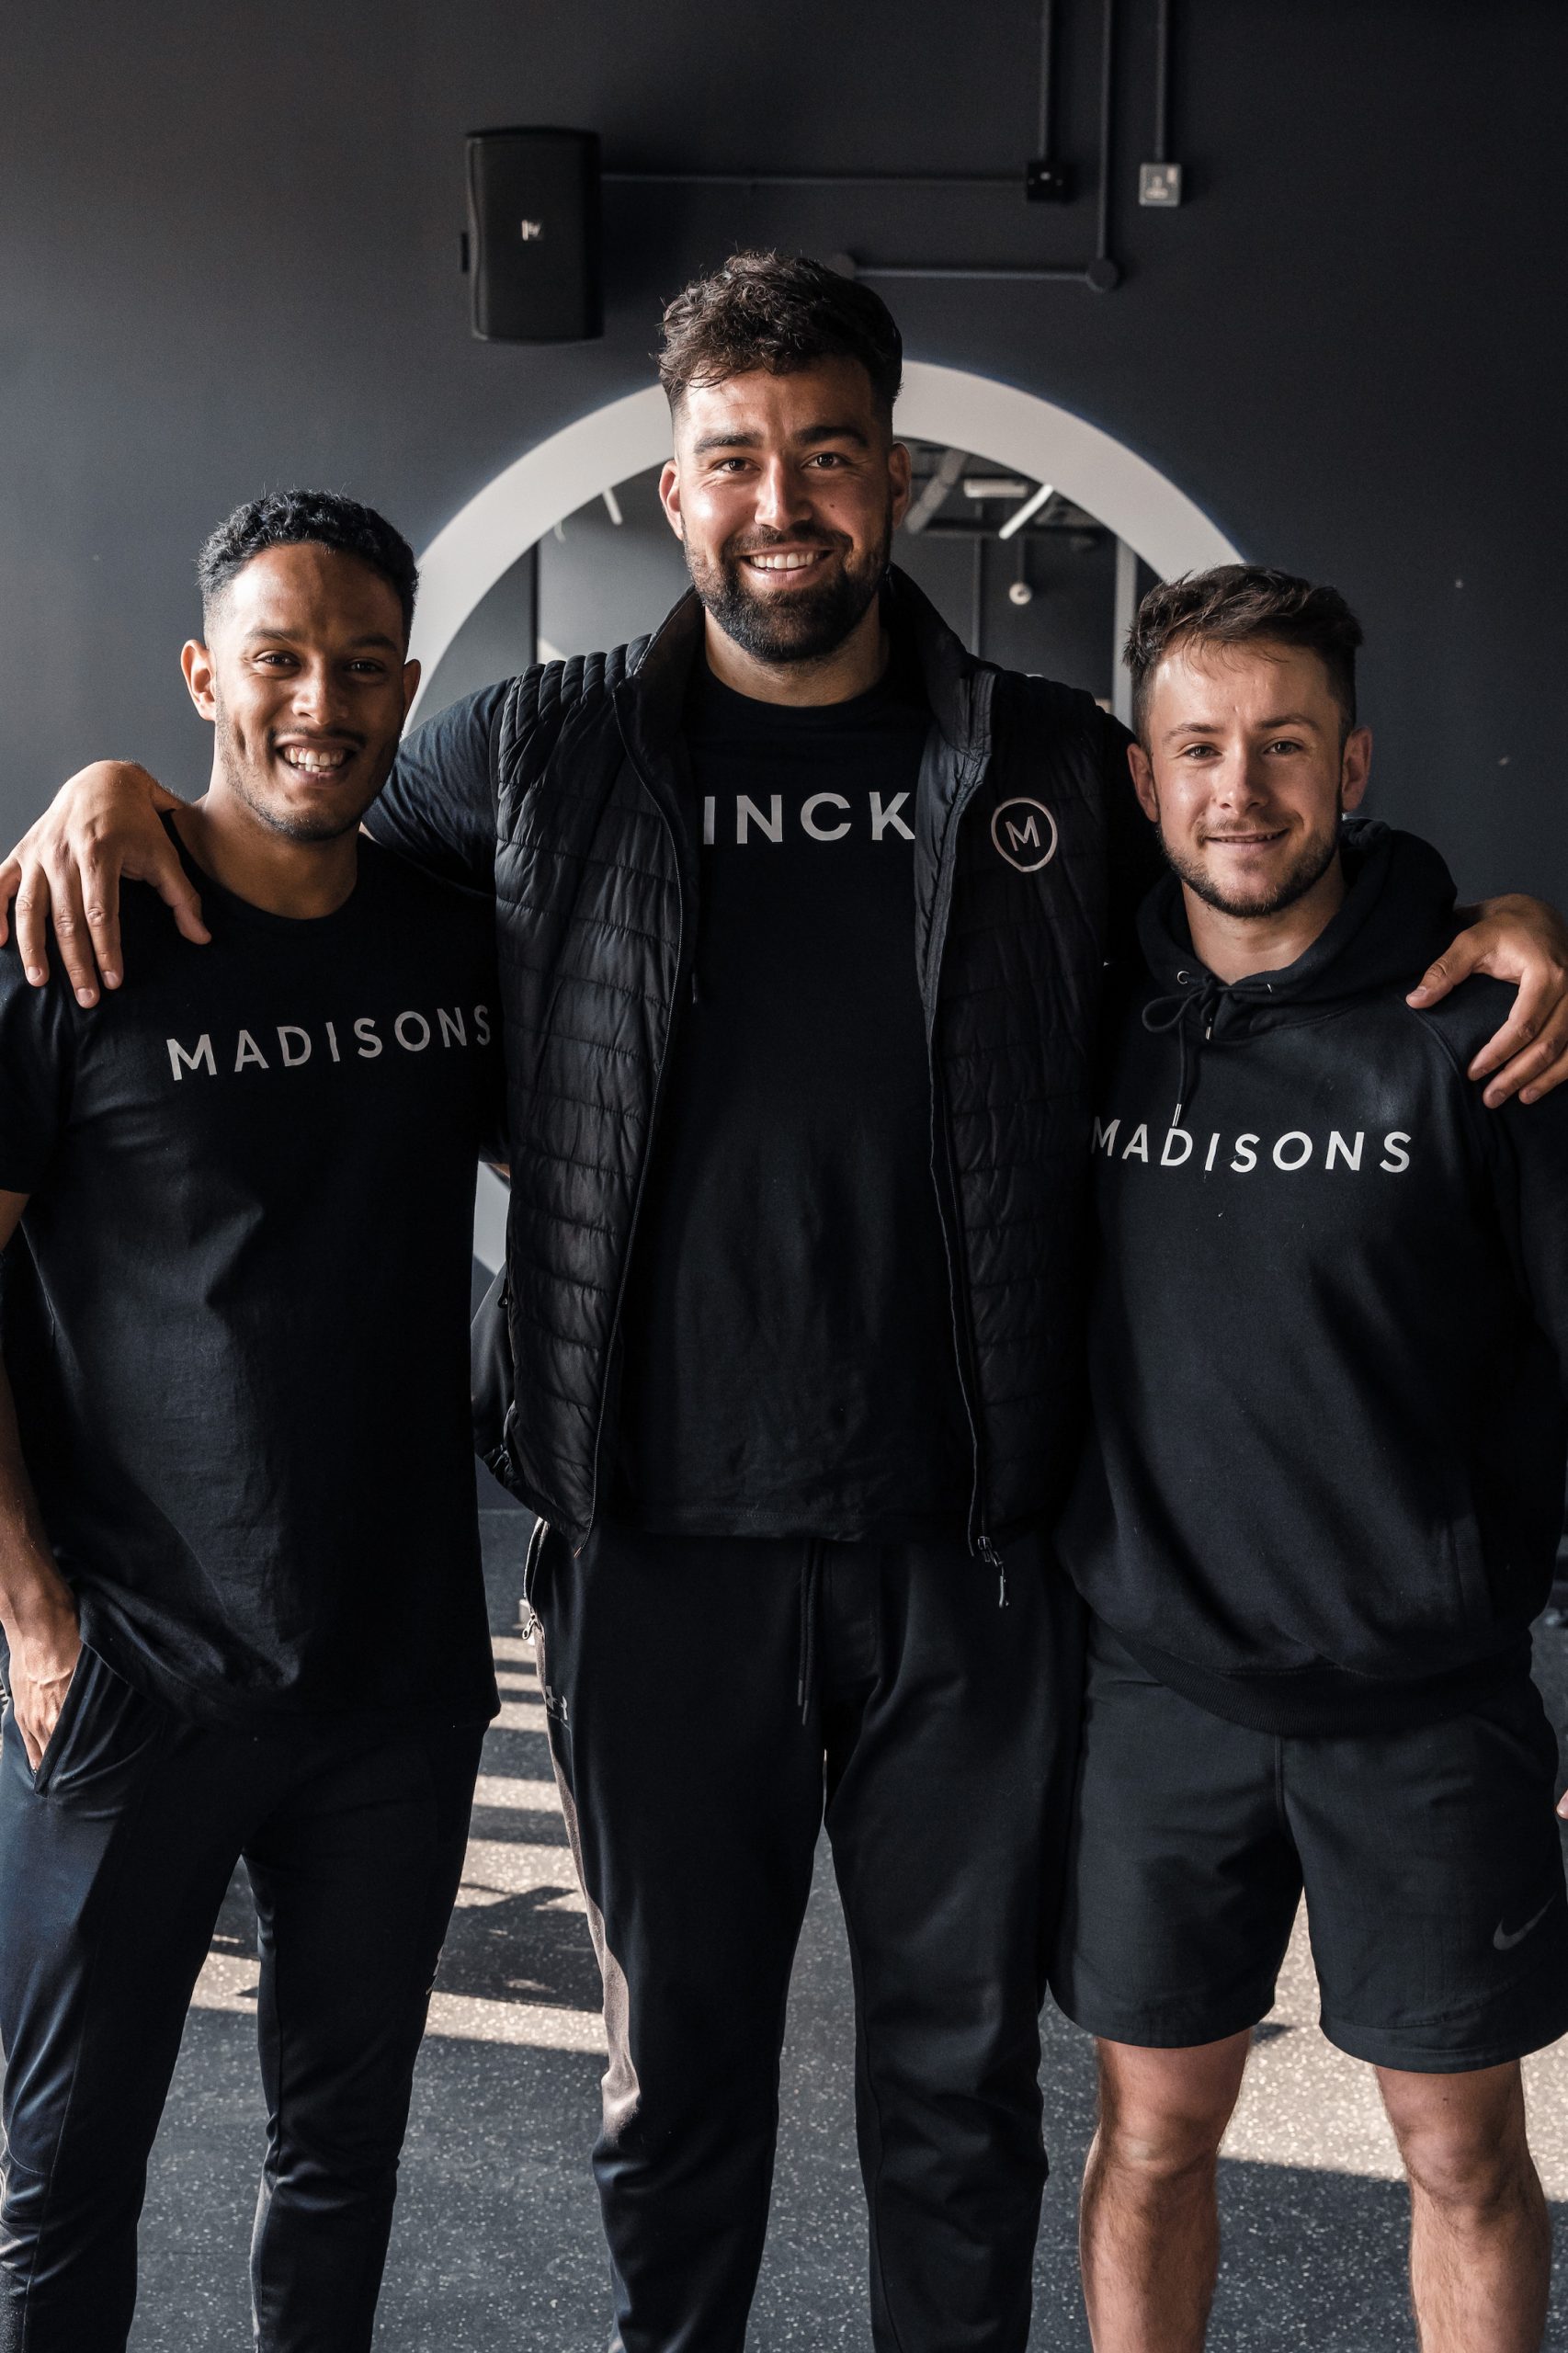 Three people wearing black Madisons uniforms smiling for the camera. The person in the middle has his arms aorund the other two.